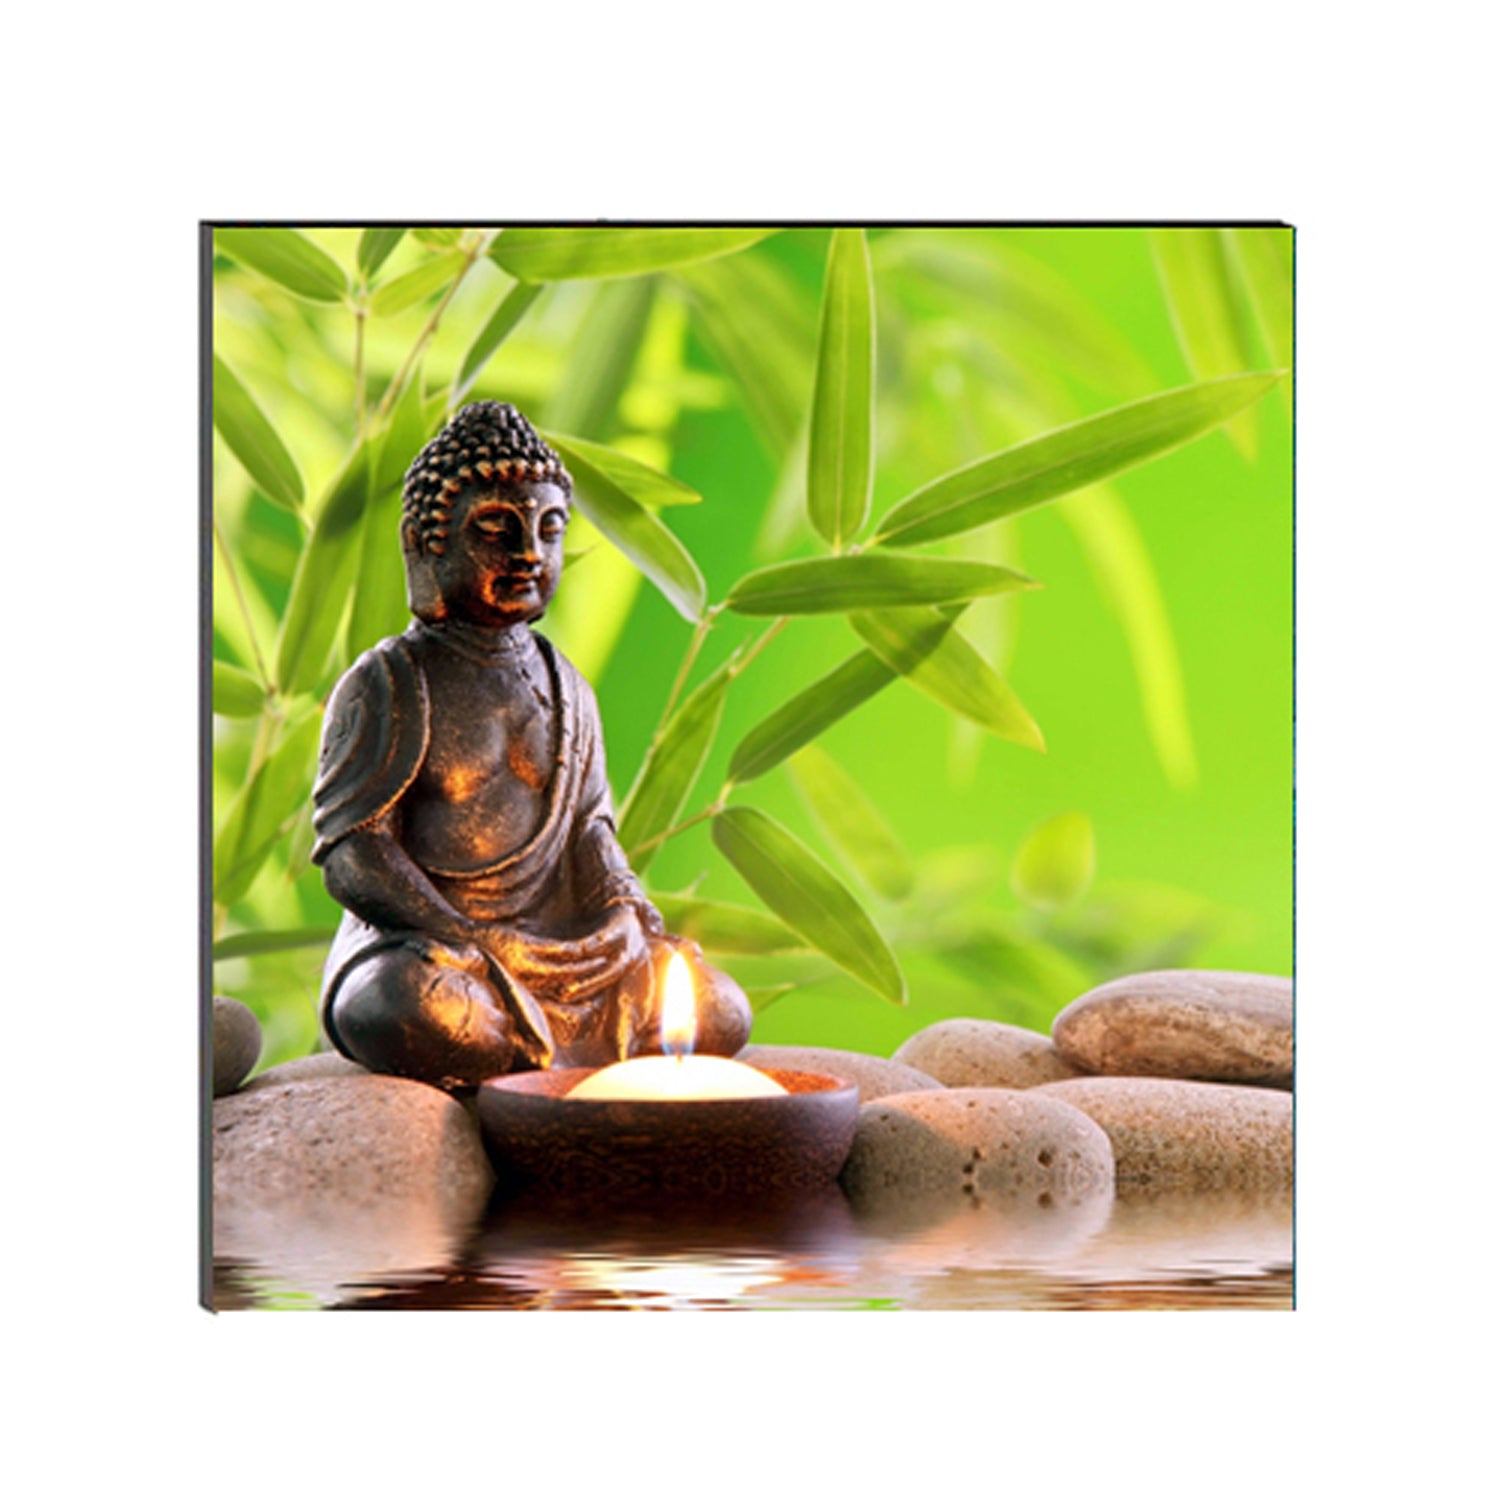 Meditating Lord Buddha Painting With Candle Digital Printed Religious Wall Art